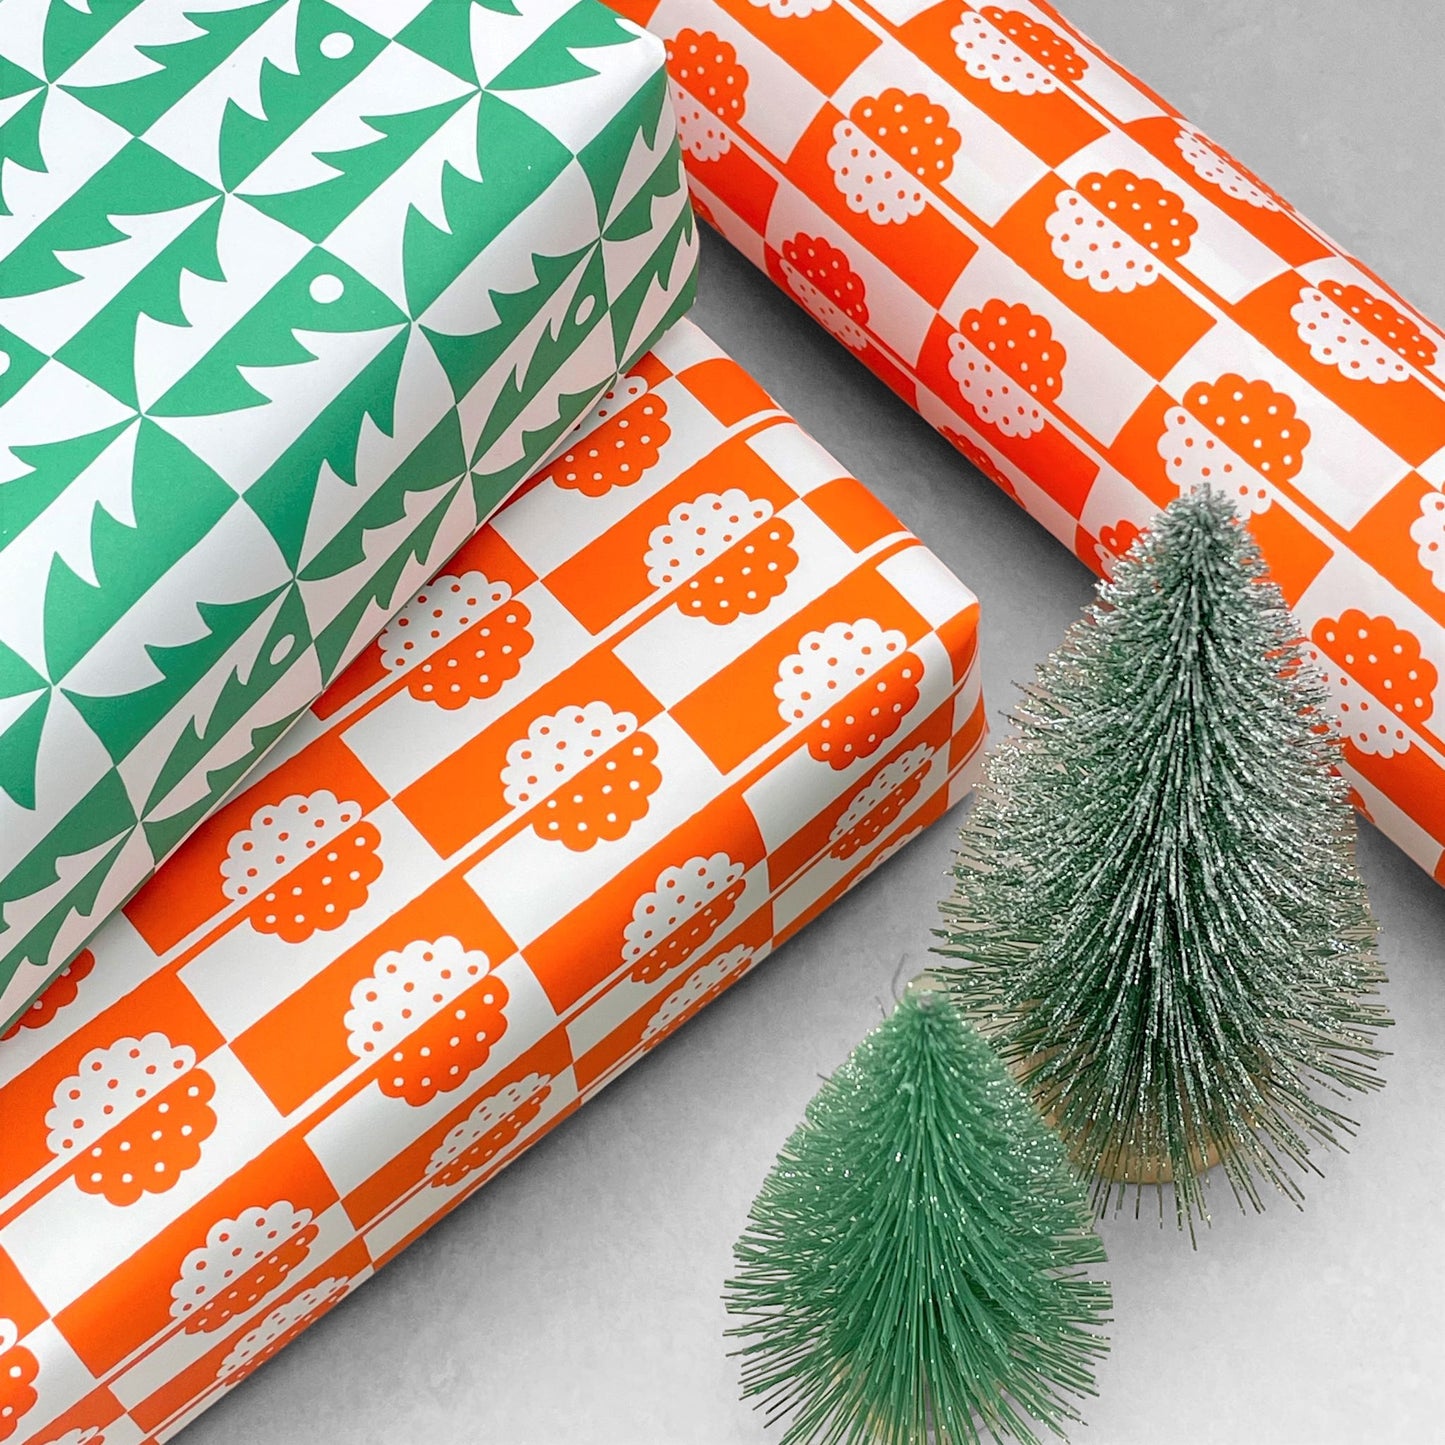 patterned paper, gift wrap, with all-over holly tree design in bright orange and white, by Ariana Martin